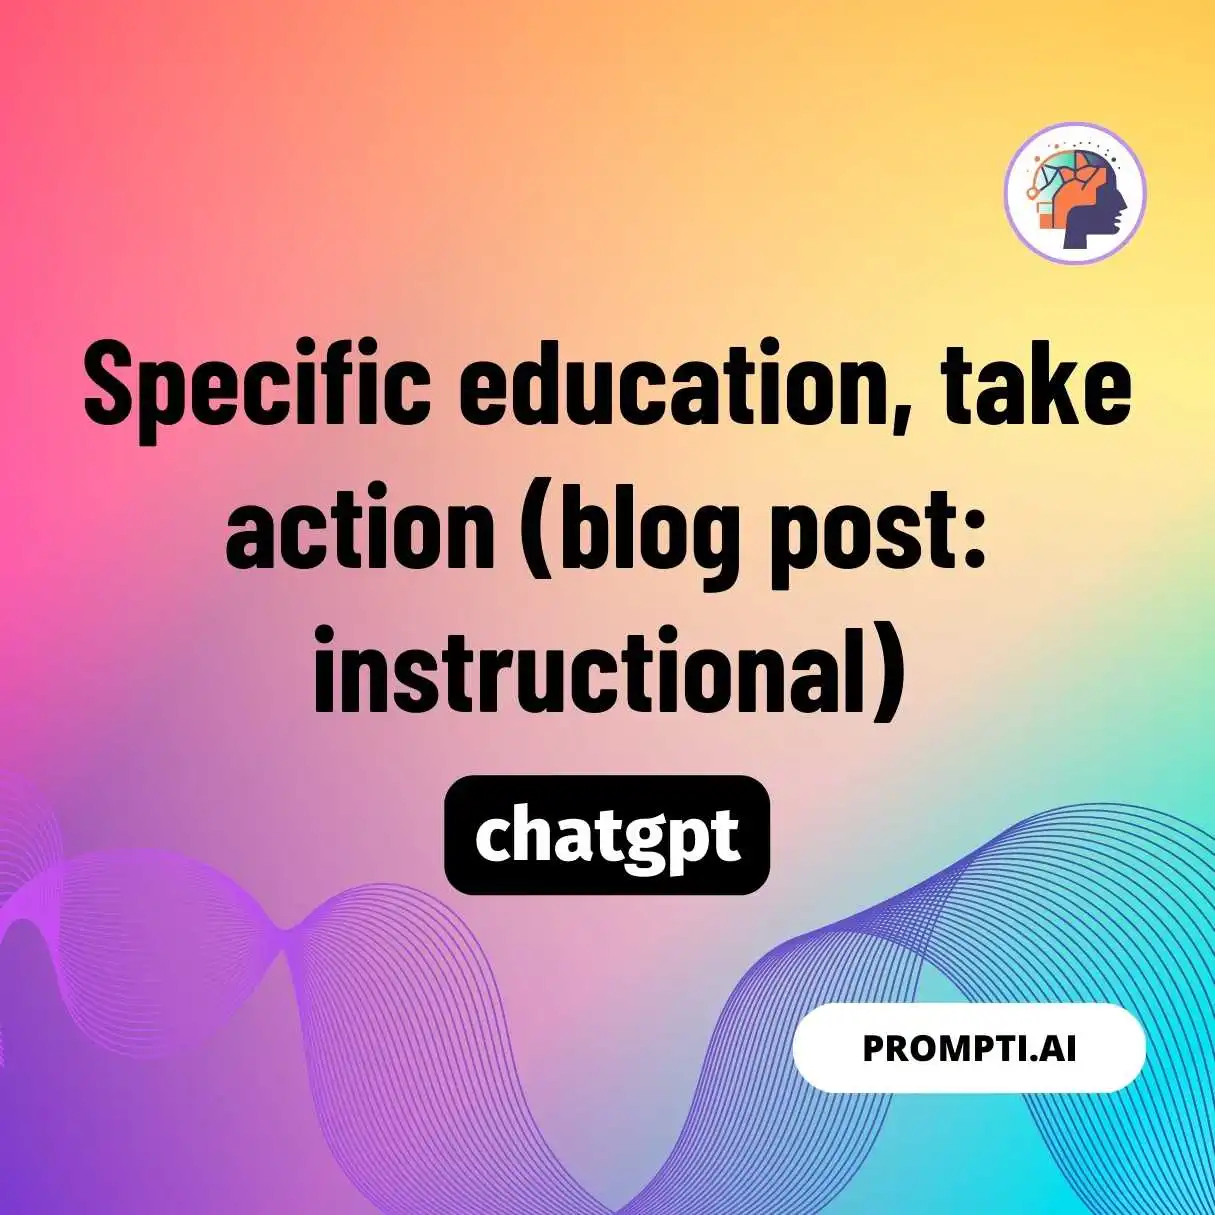 Specific education, take action (blog post: instructional)